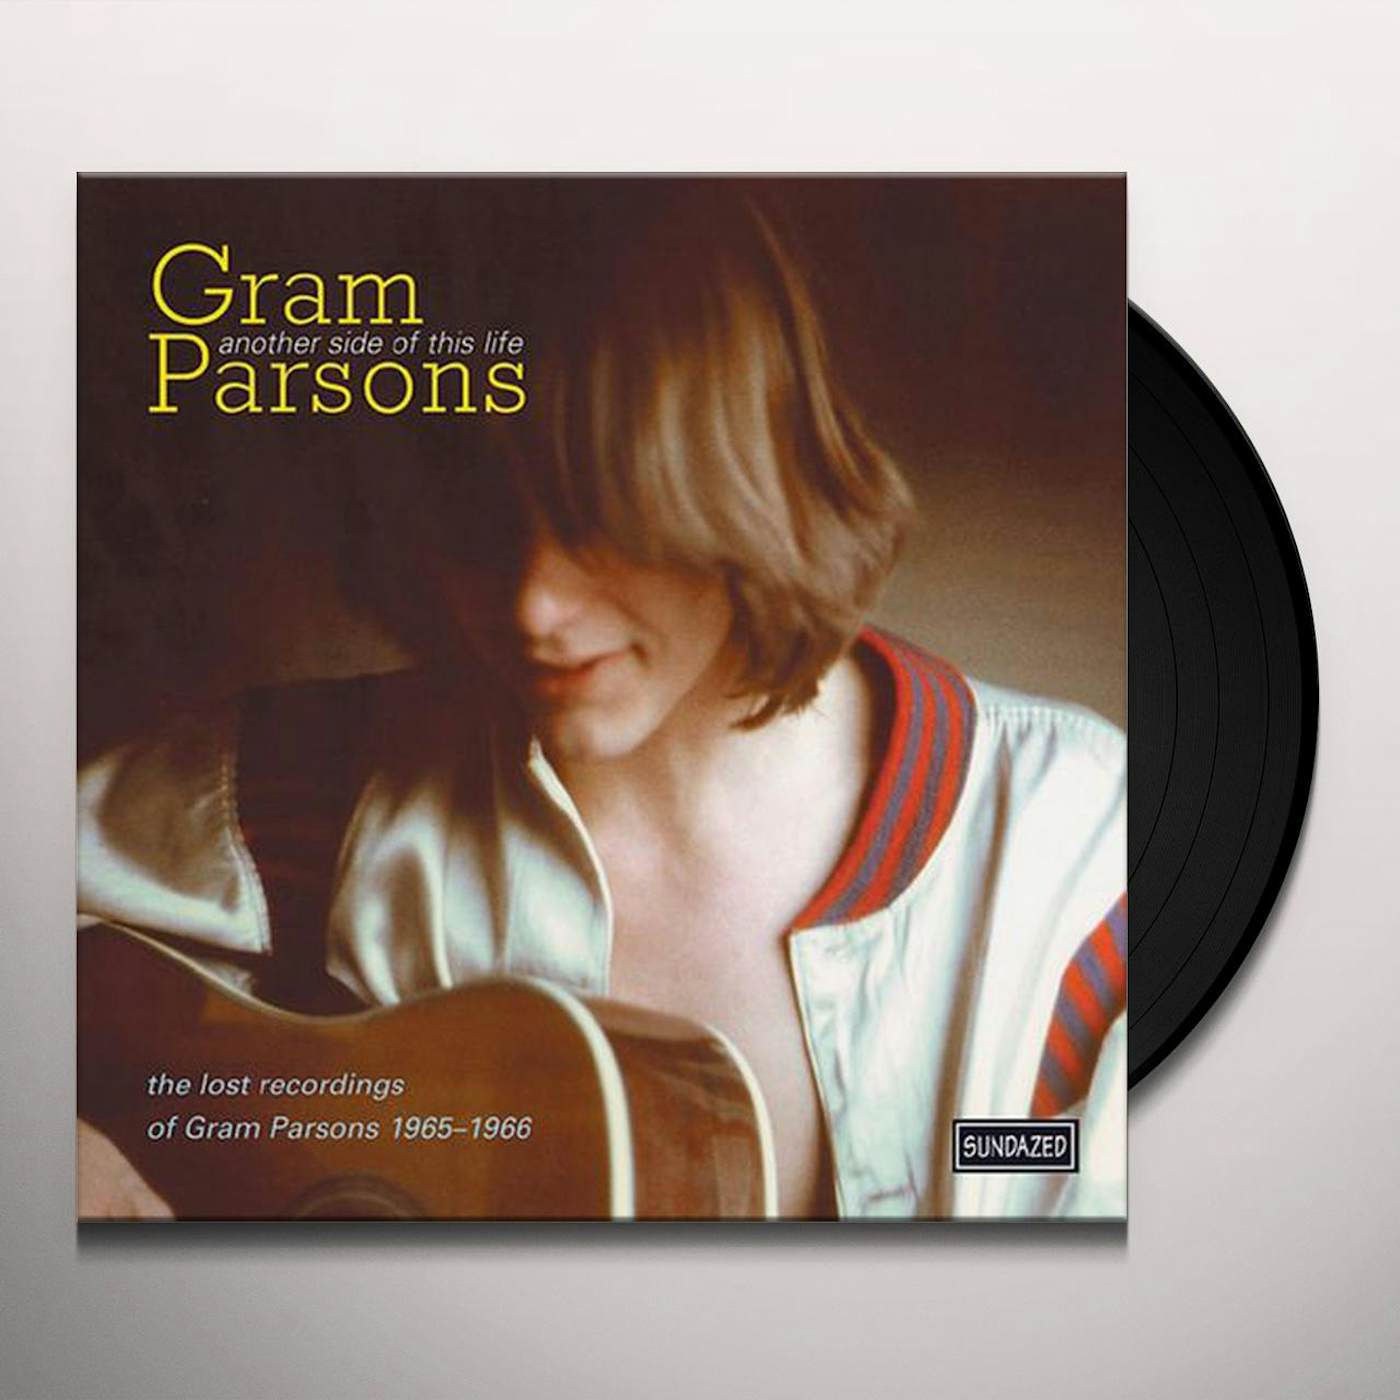 Gram Parsons Another Side of This Life Vinyl Record